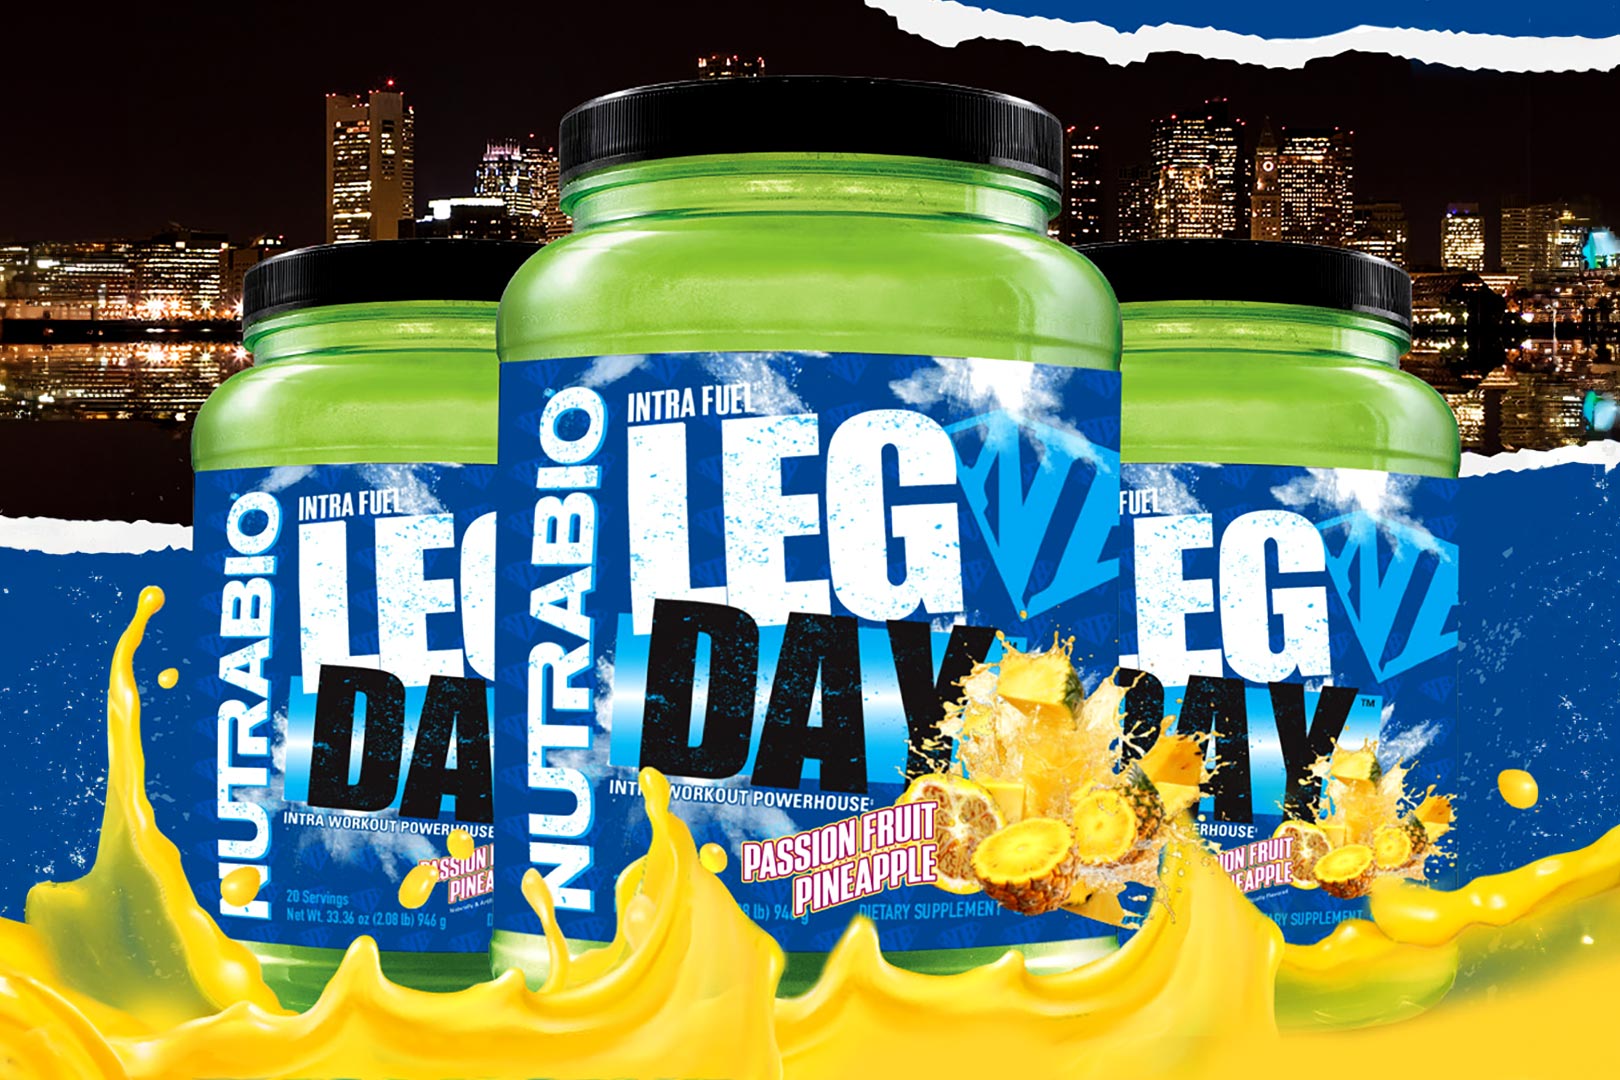 Nutrabio Passion Fruit Pineapple Natural Body Leg Day